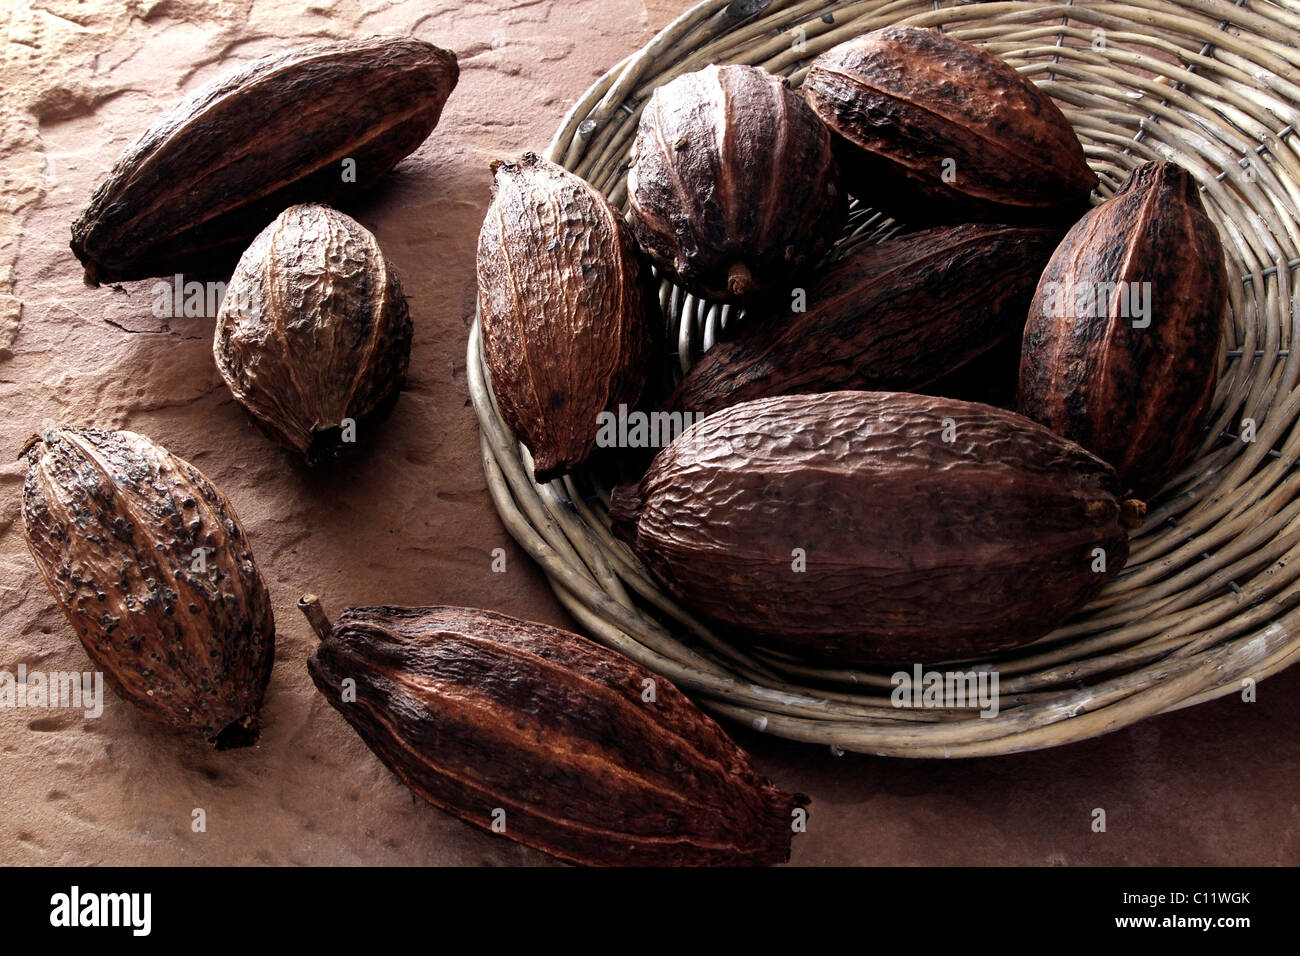 Cocoa beans, tipped from a wicker plate on sandstone Stock Photo